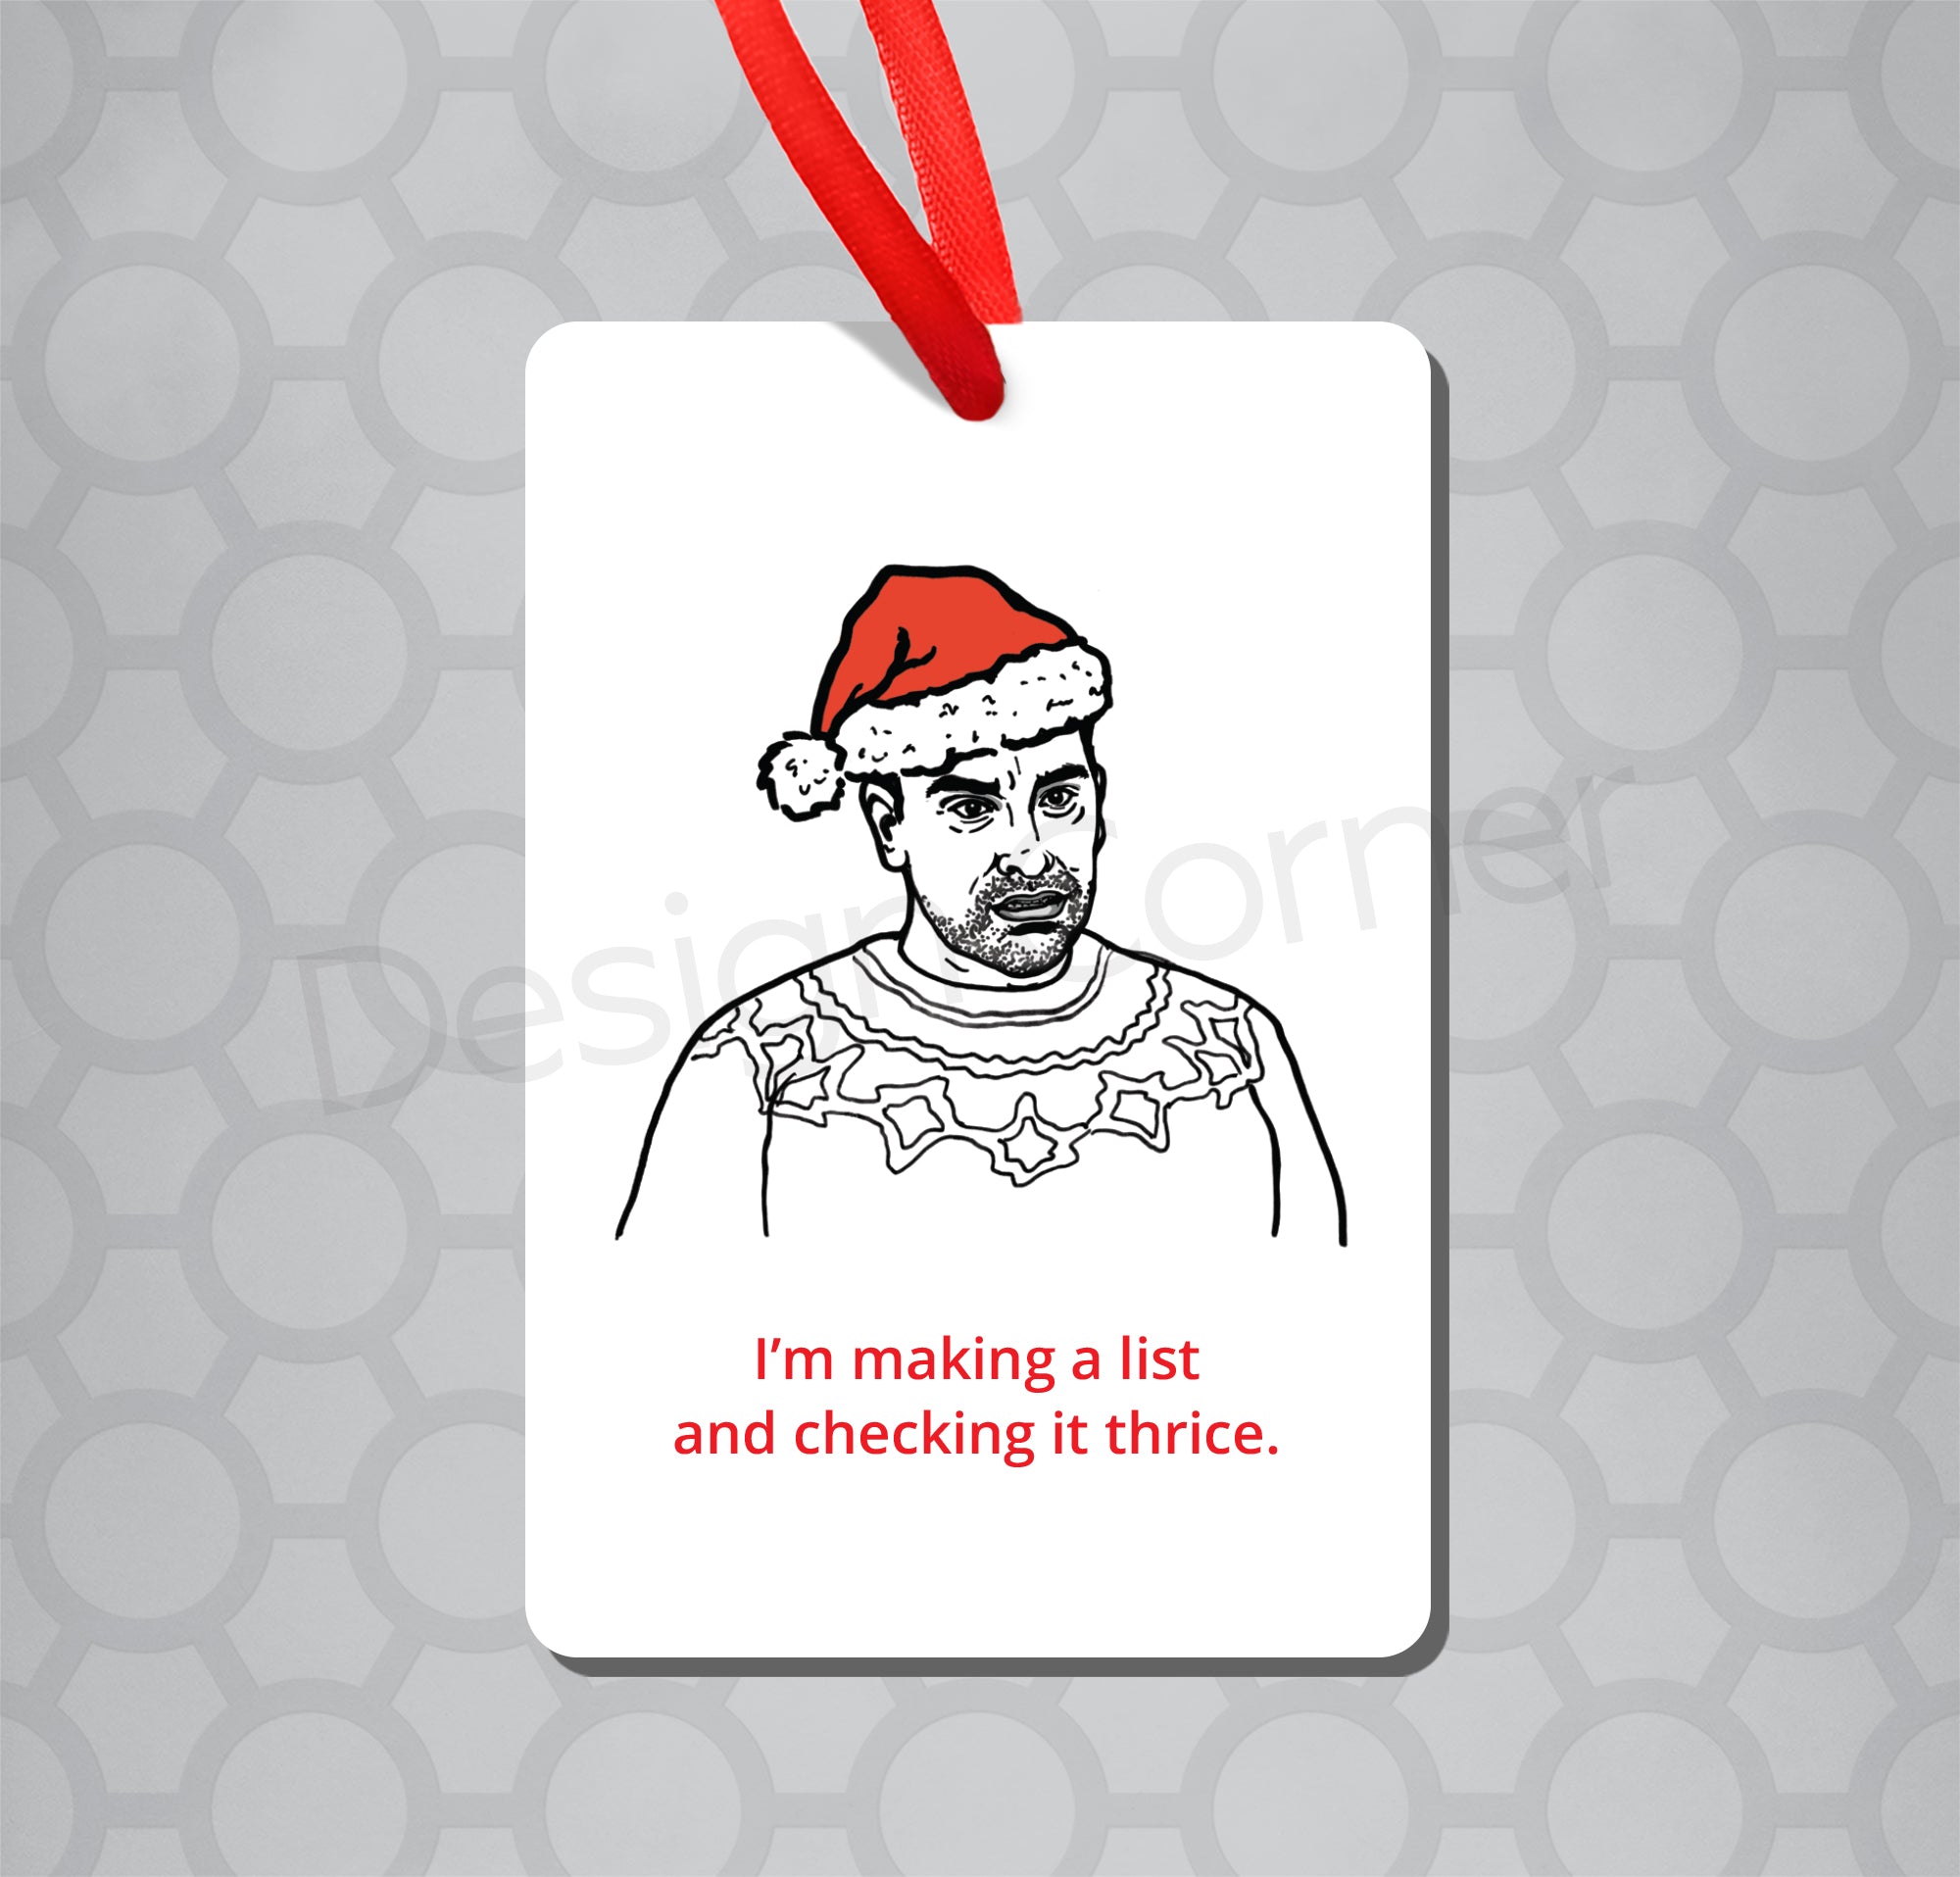 Illustration of Schitts Creek David on magnet ornament with caption "I'm making a list and checking it thrice"